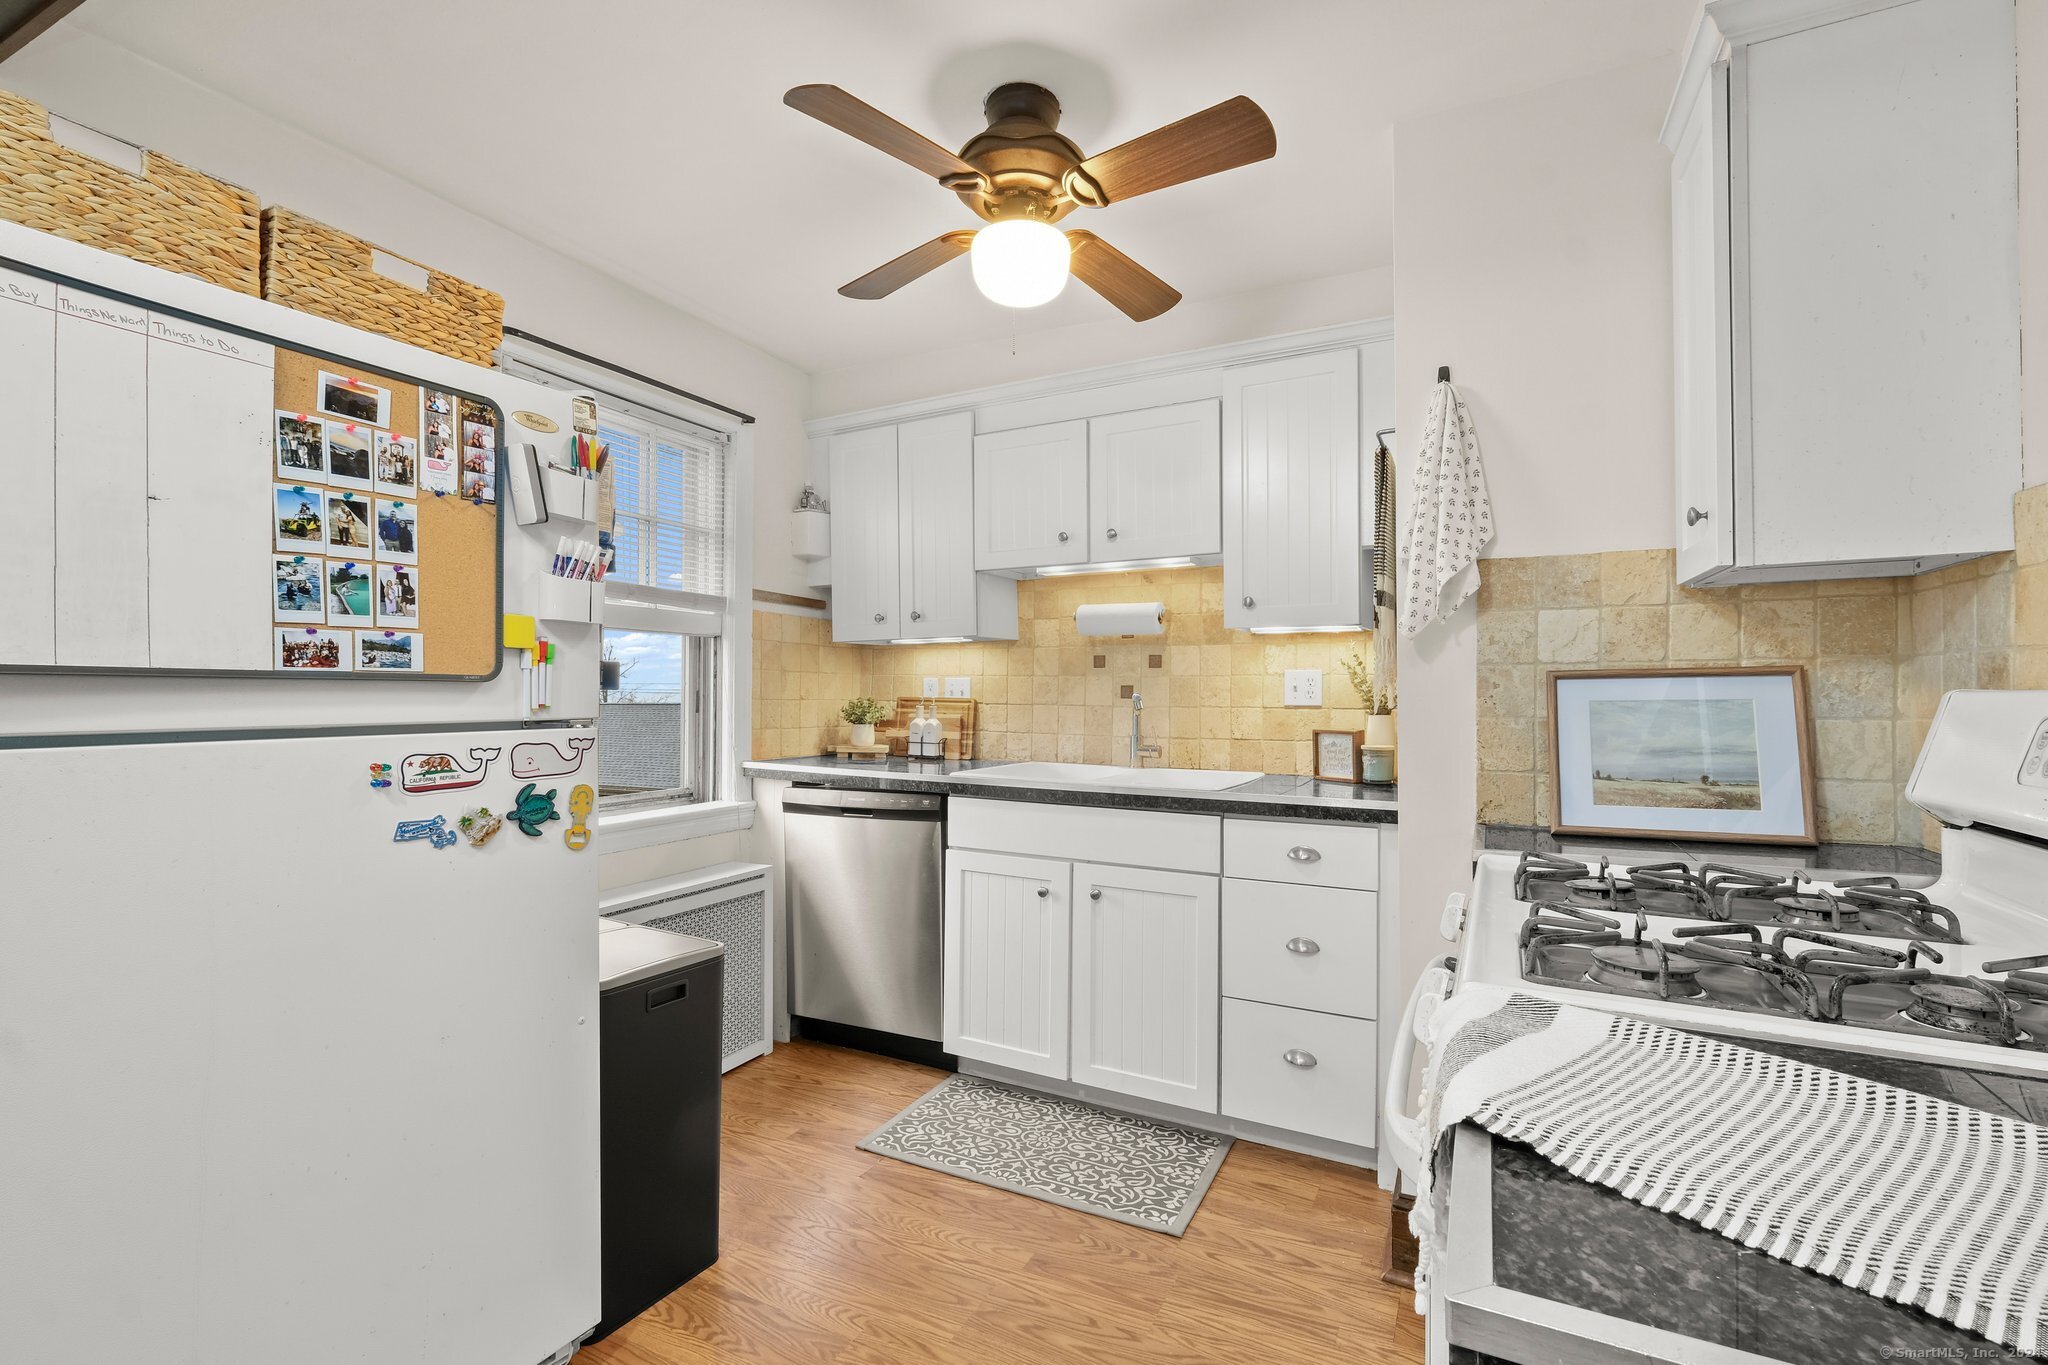 a kitchen with a refrigerator a stove a sink and cabinets